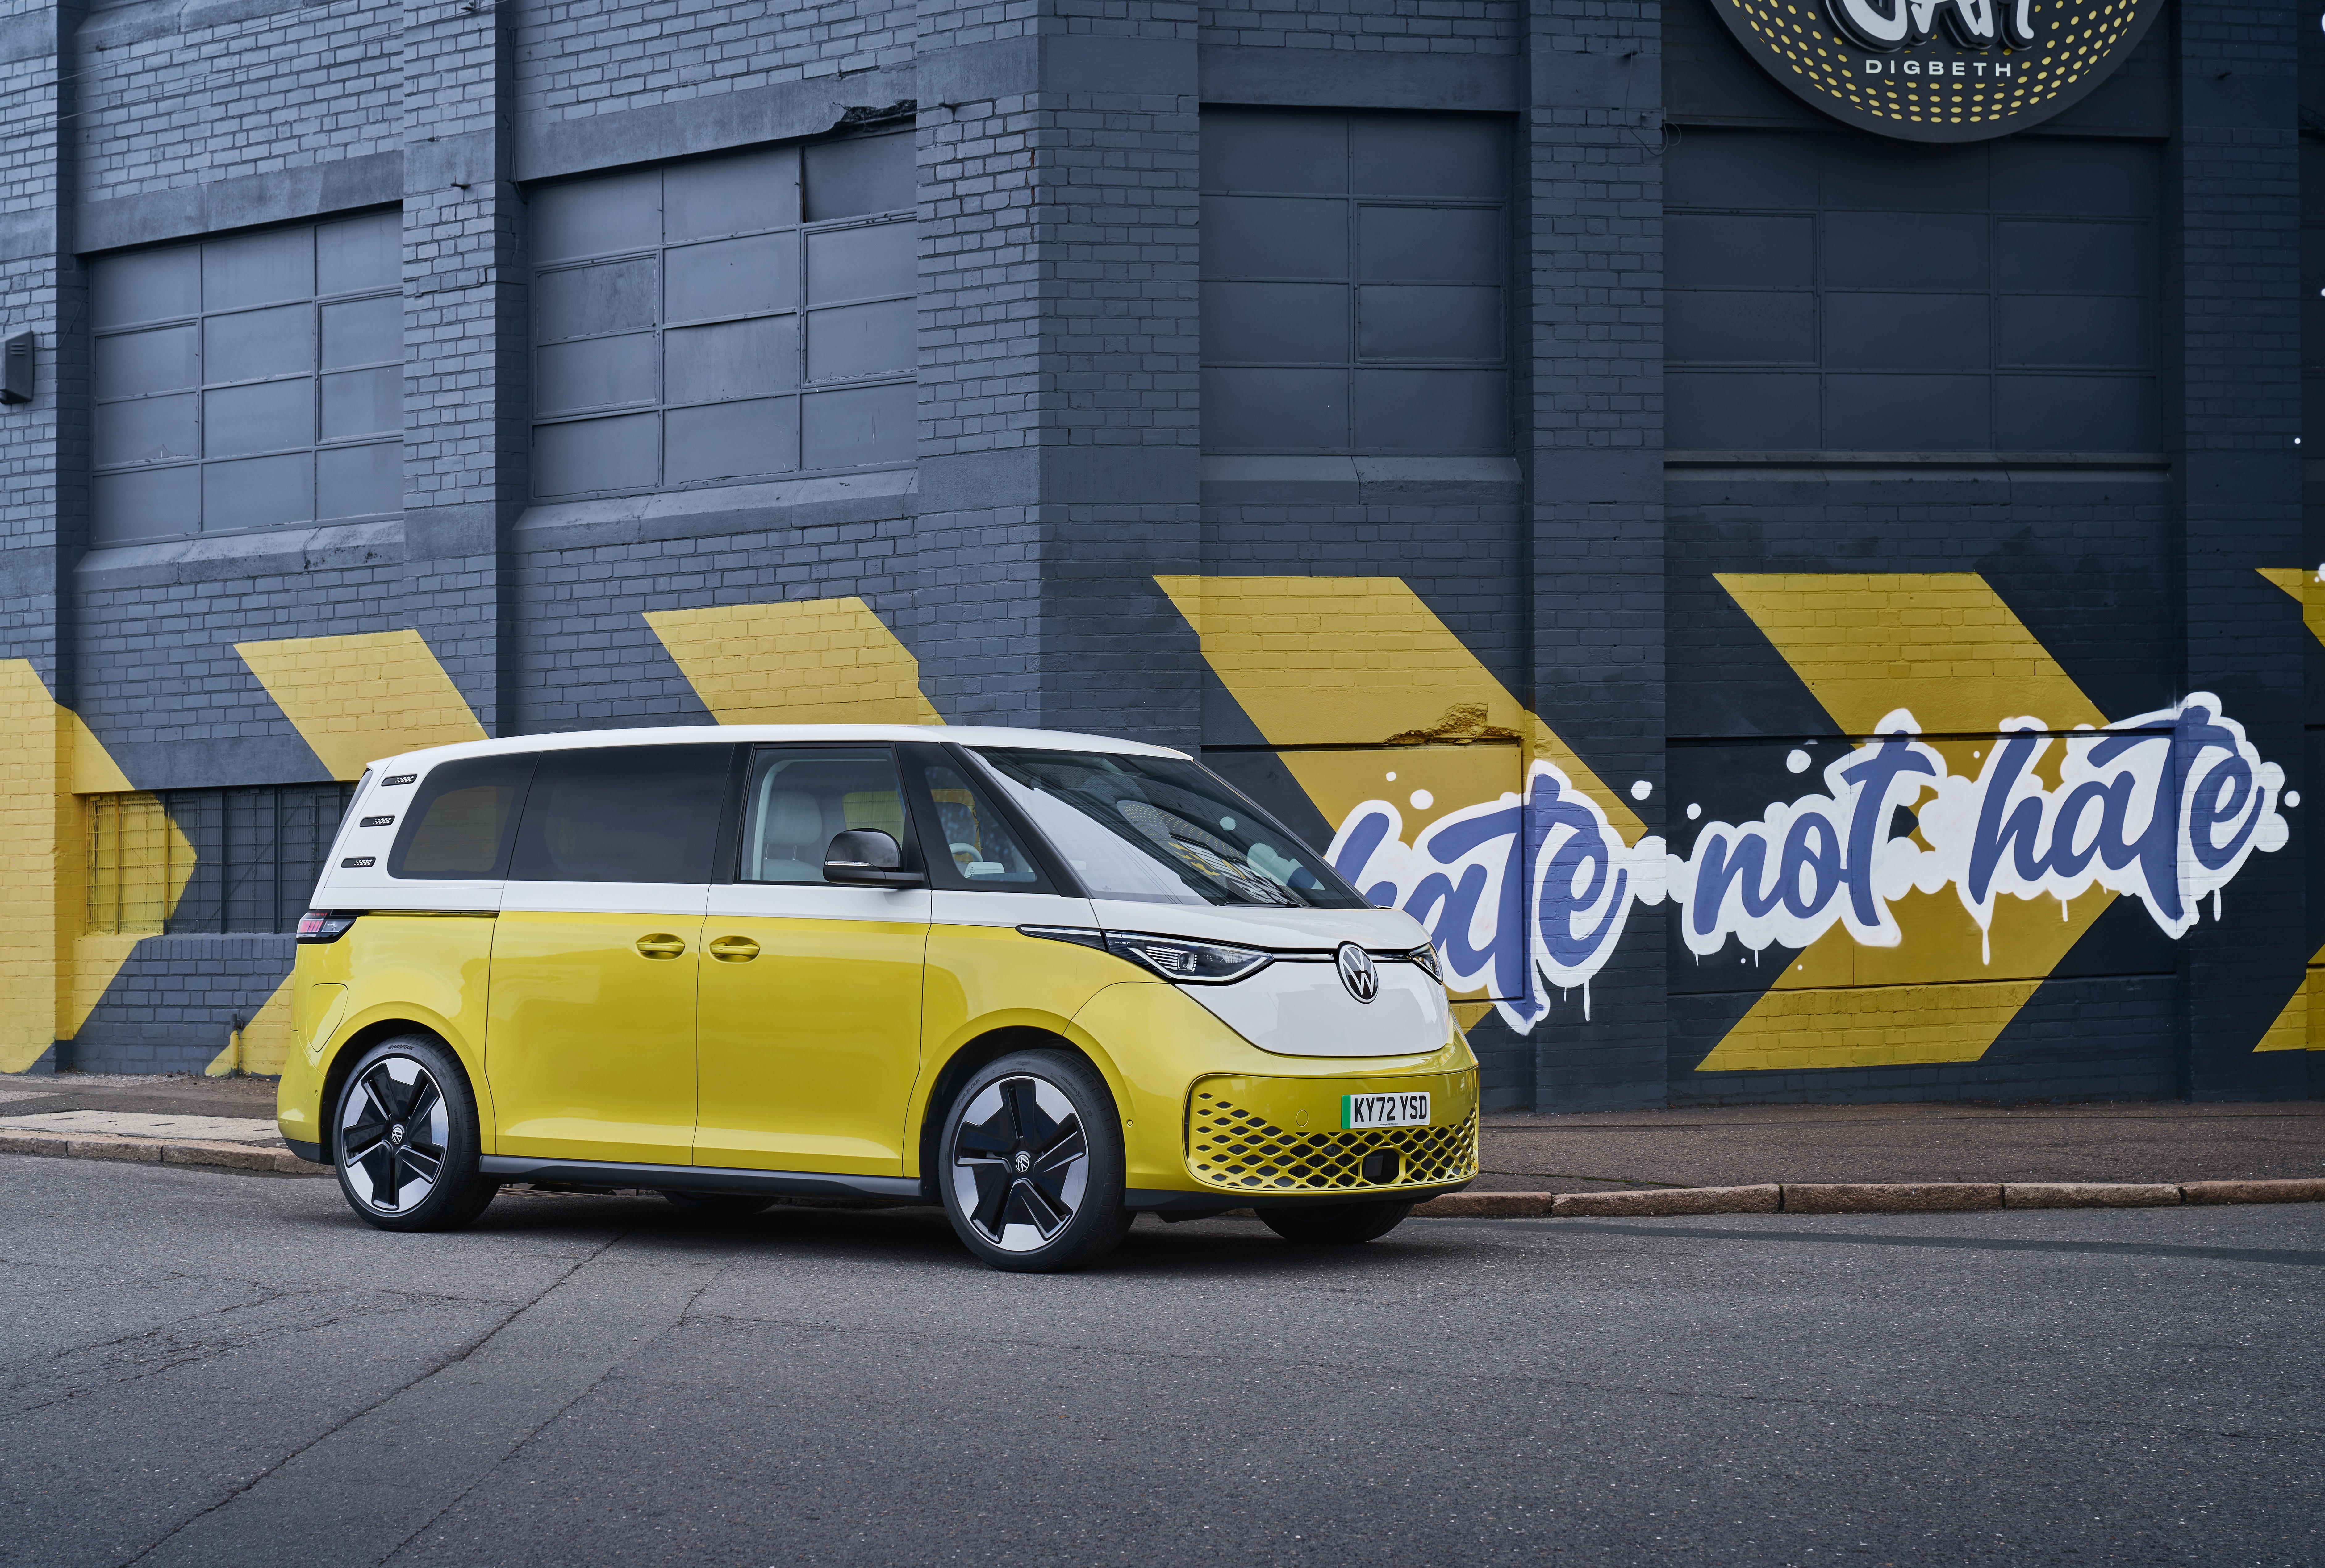 ID. Buzz voted MPV of the Year at Top Gear Awards